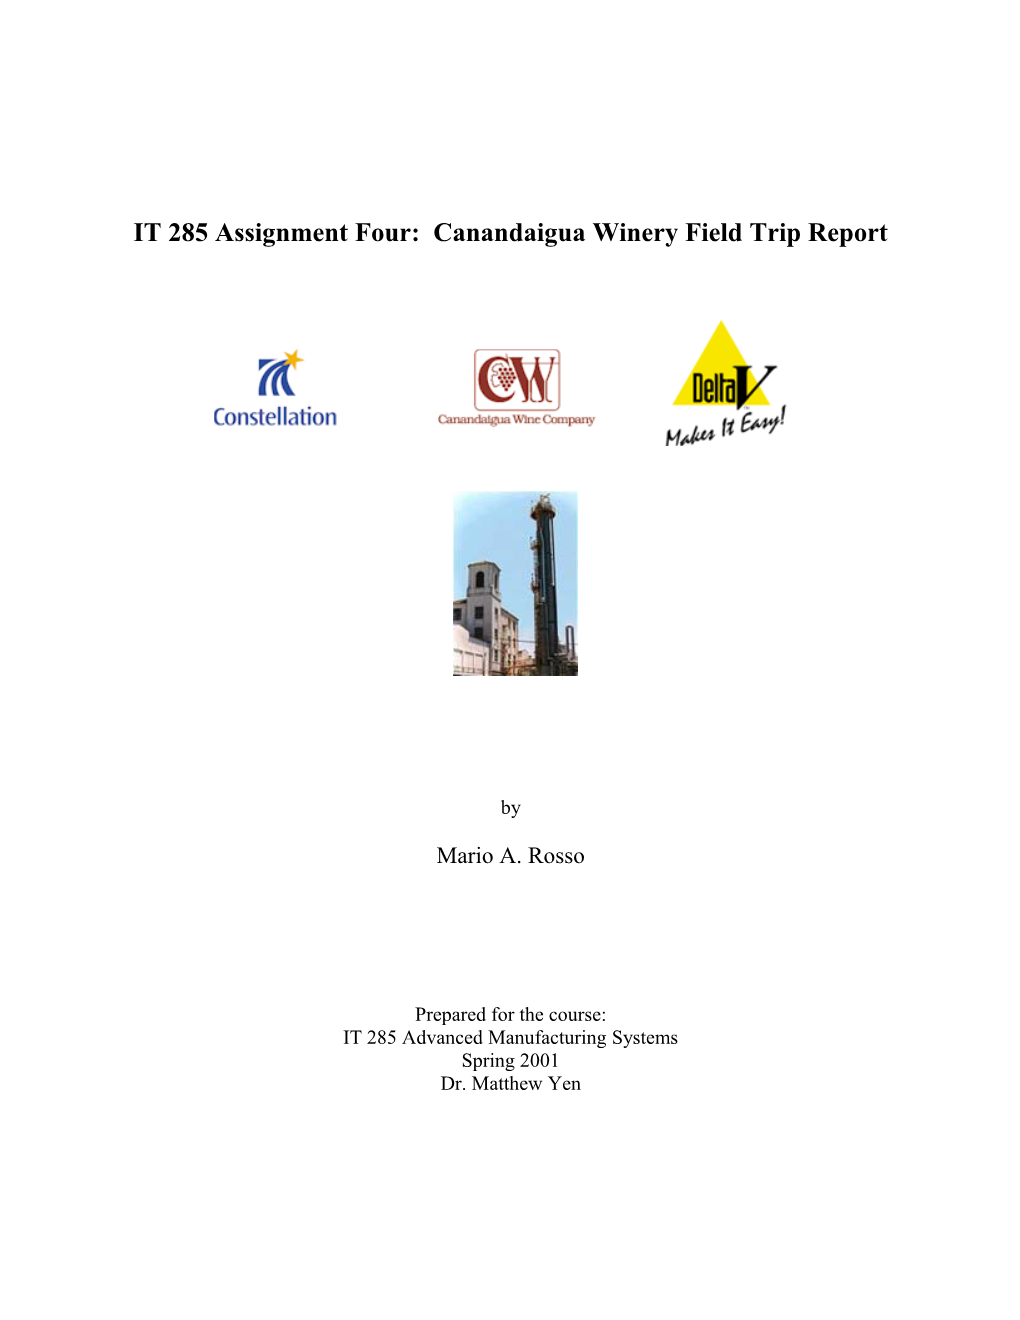 IT 285 Assignment Four: Canandaigua Winery Field Trip Report